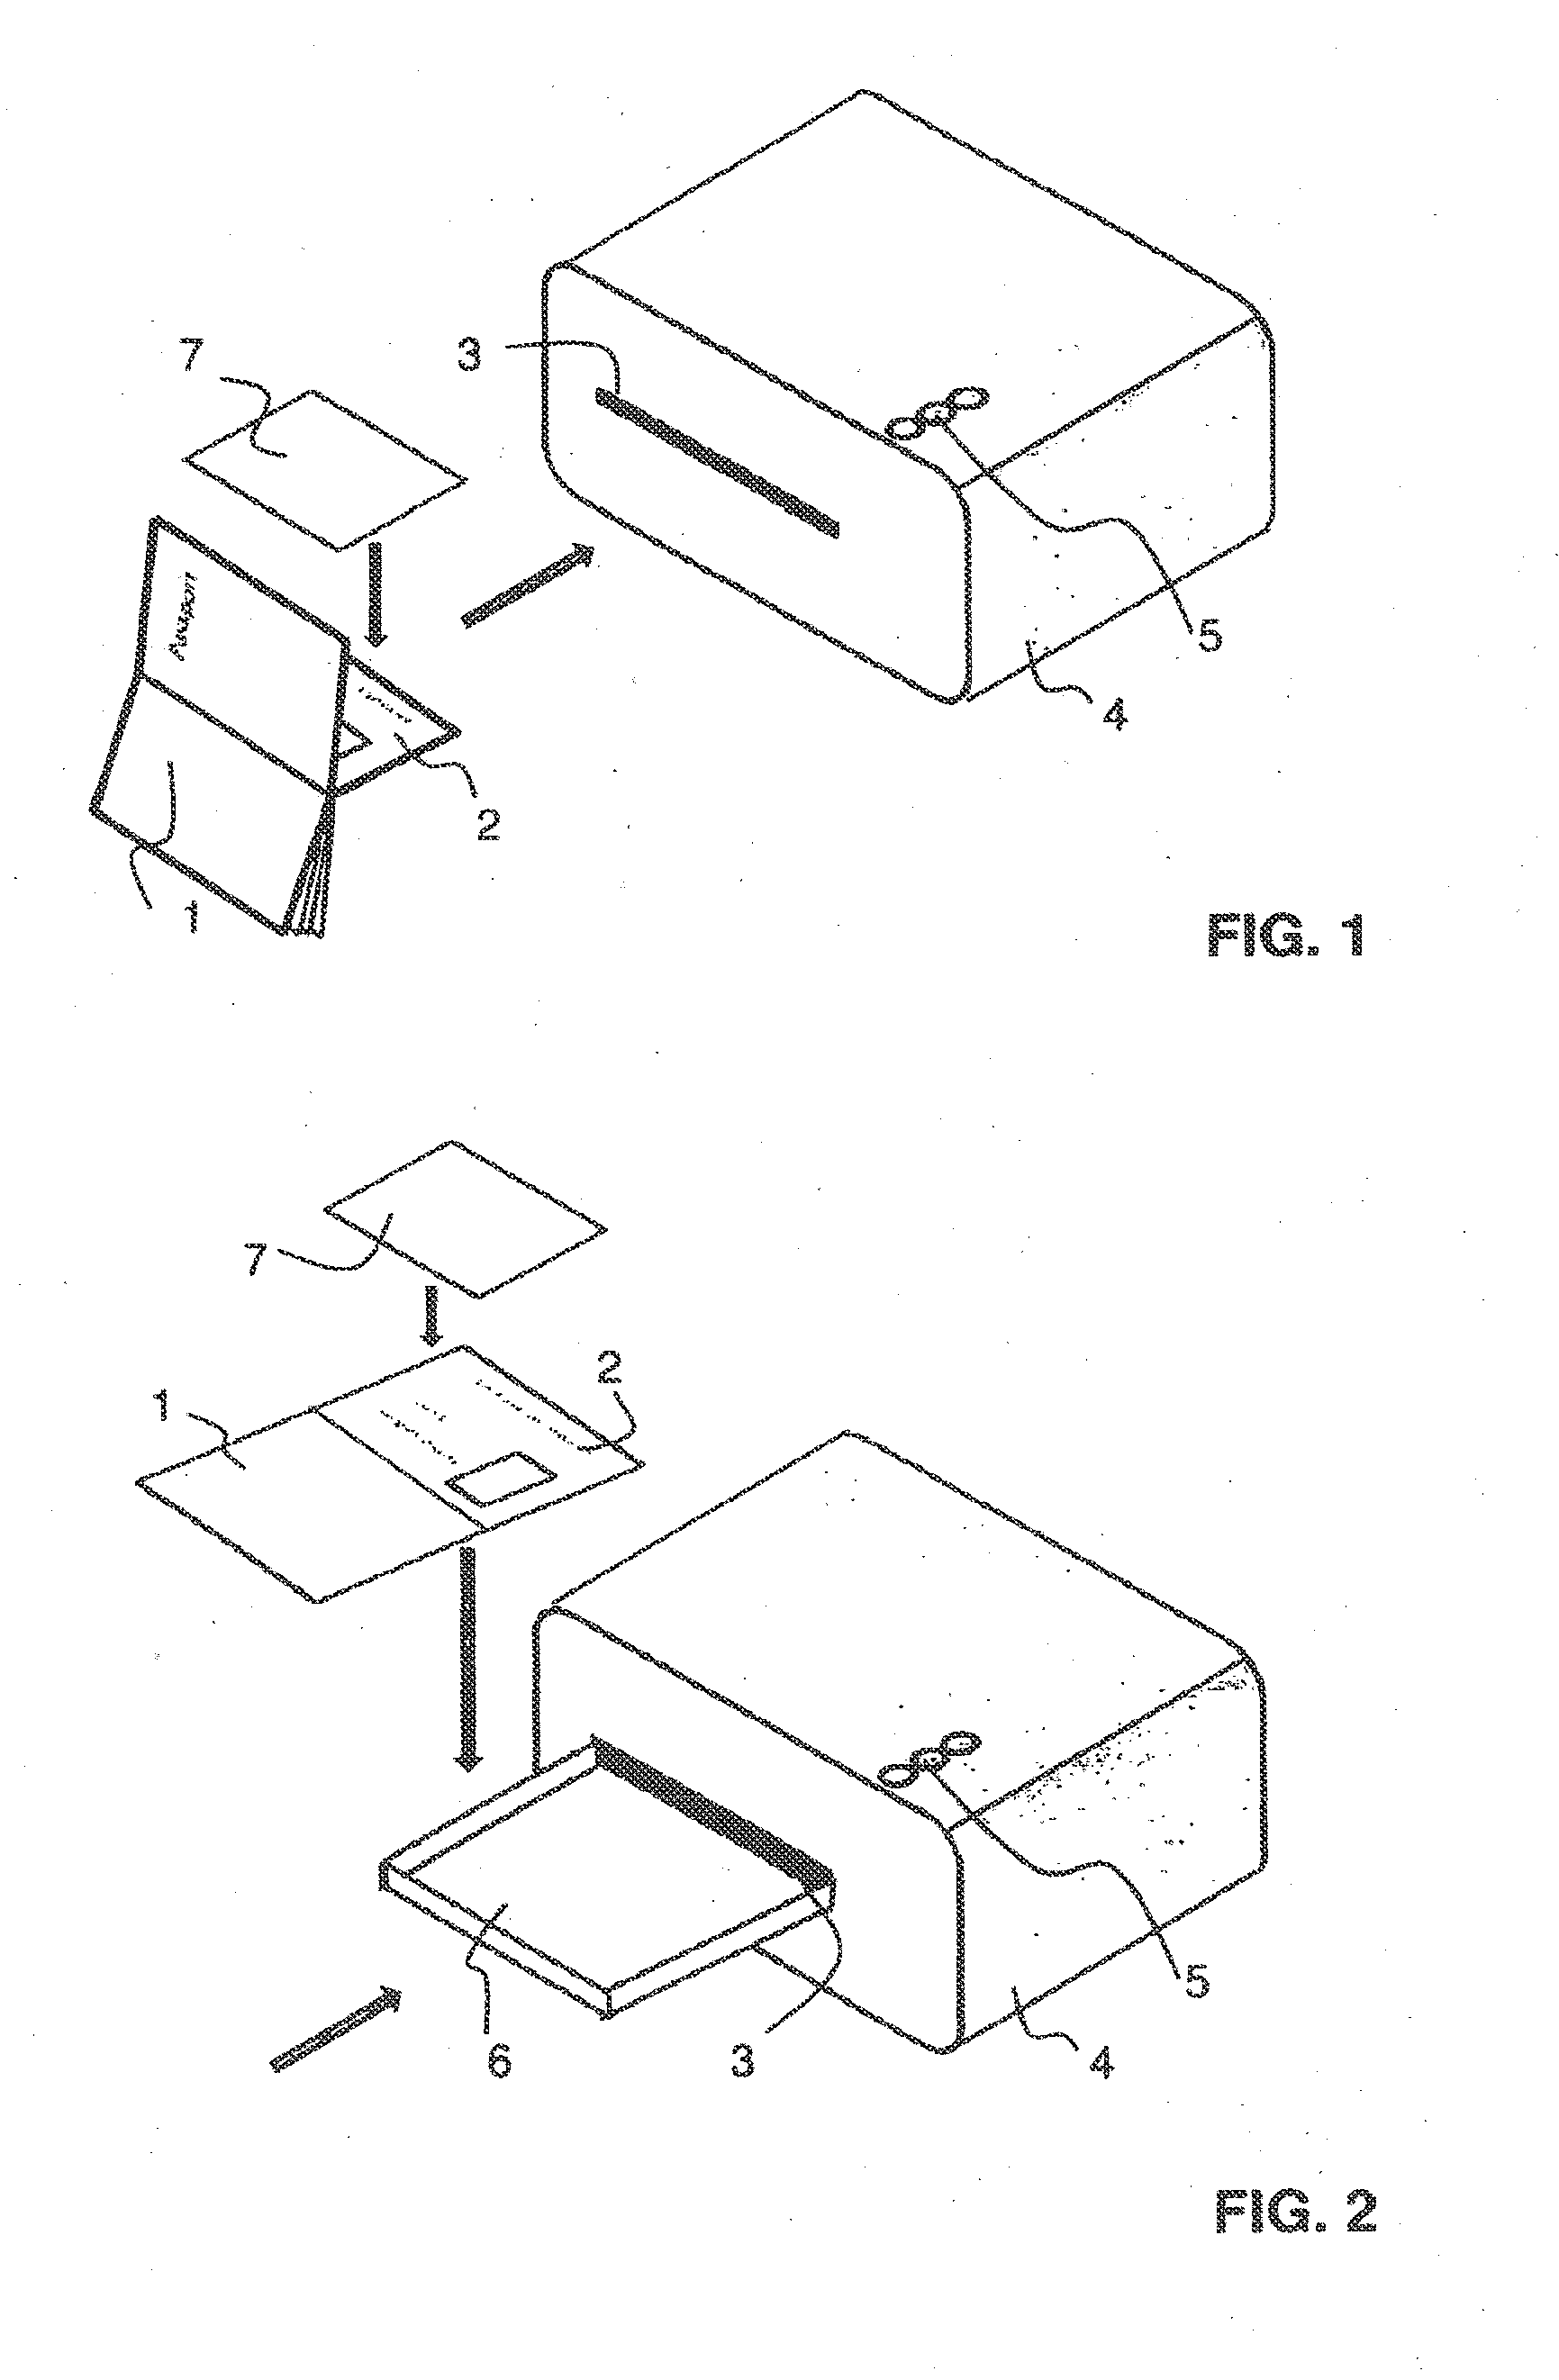 Lamination apparatus and method for sheet materials having temperature-sensitive elements, and documents produced thereby